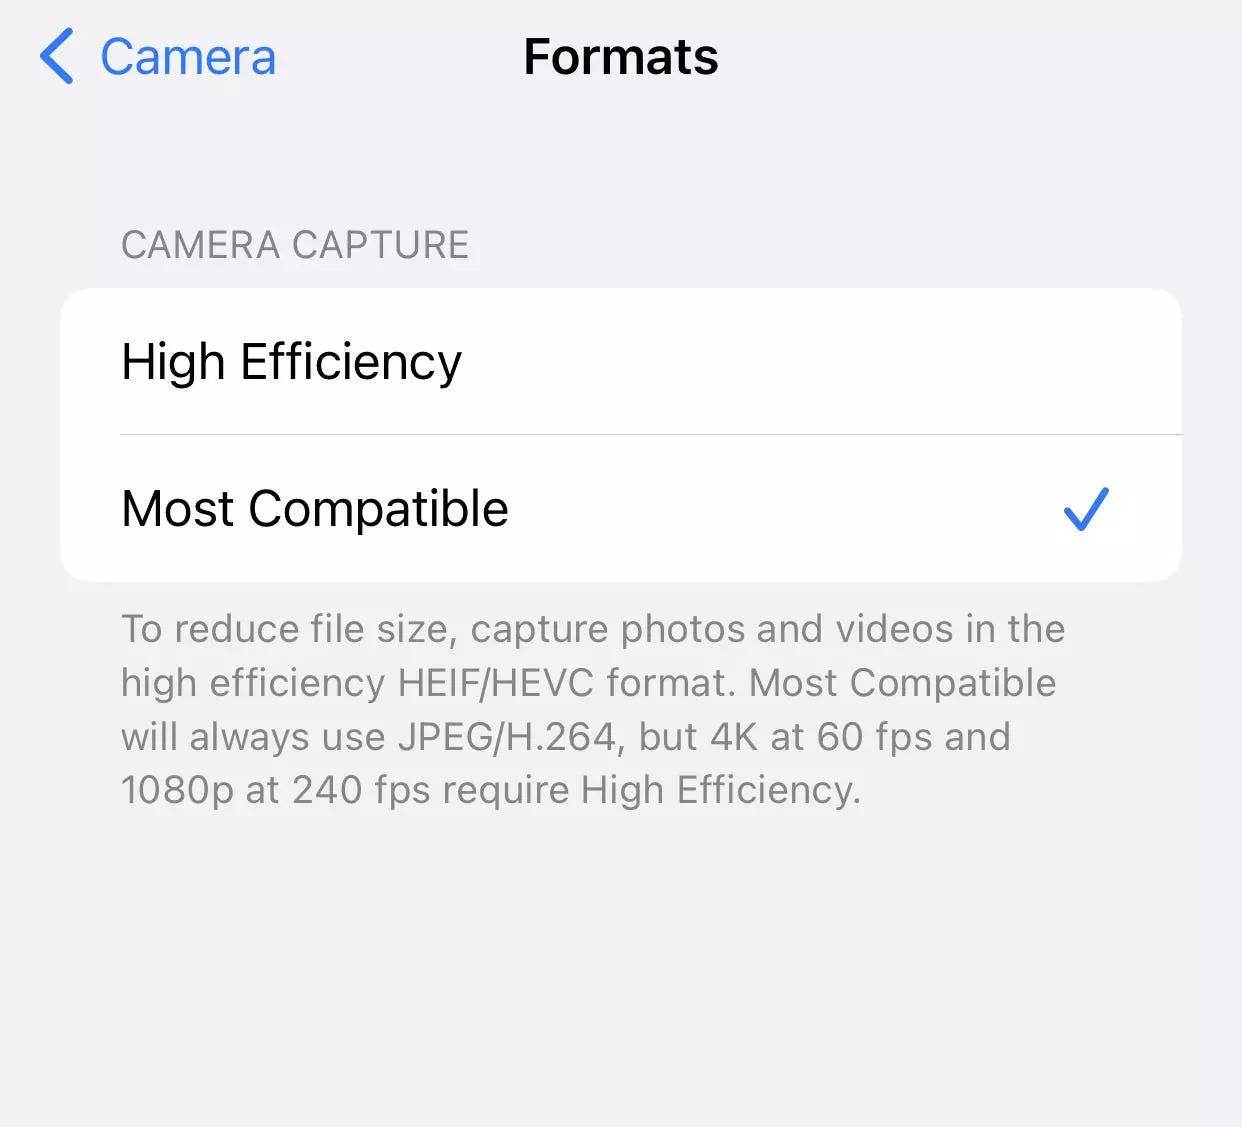 How to convert HEIC files to JPG if you need to use the more standard file format